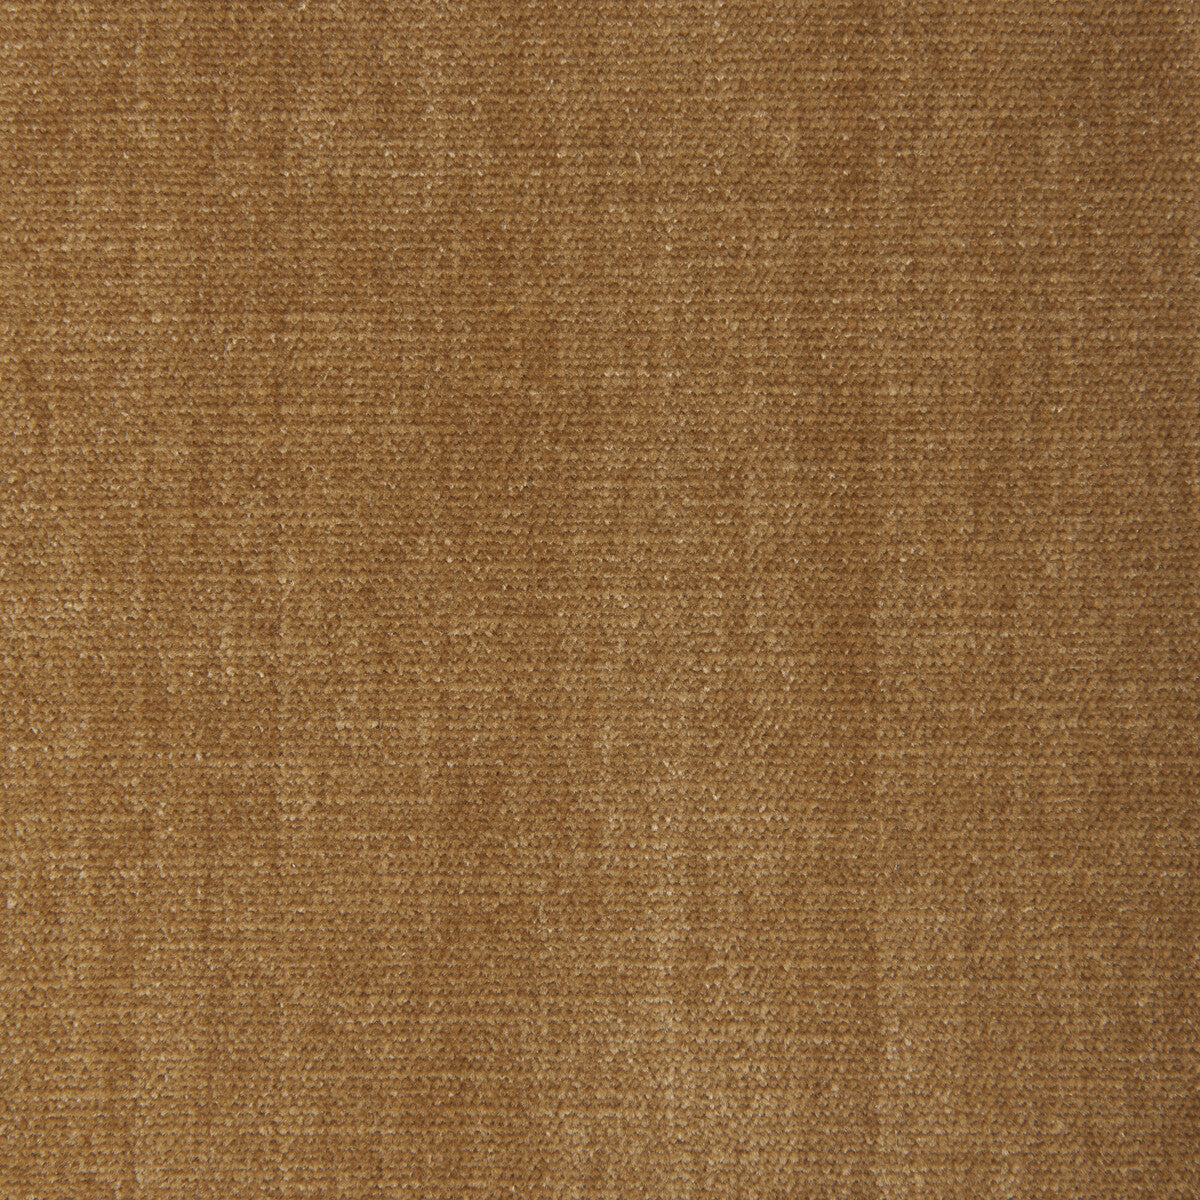 Kravet Smart fabric in 36076-166 color - pattern 36076.166.0 - by Kravet Smart in the Sumptuous Chenille II collection